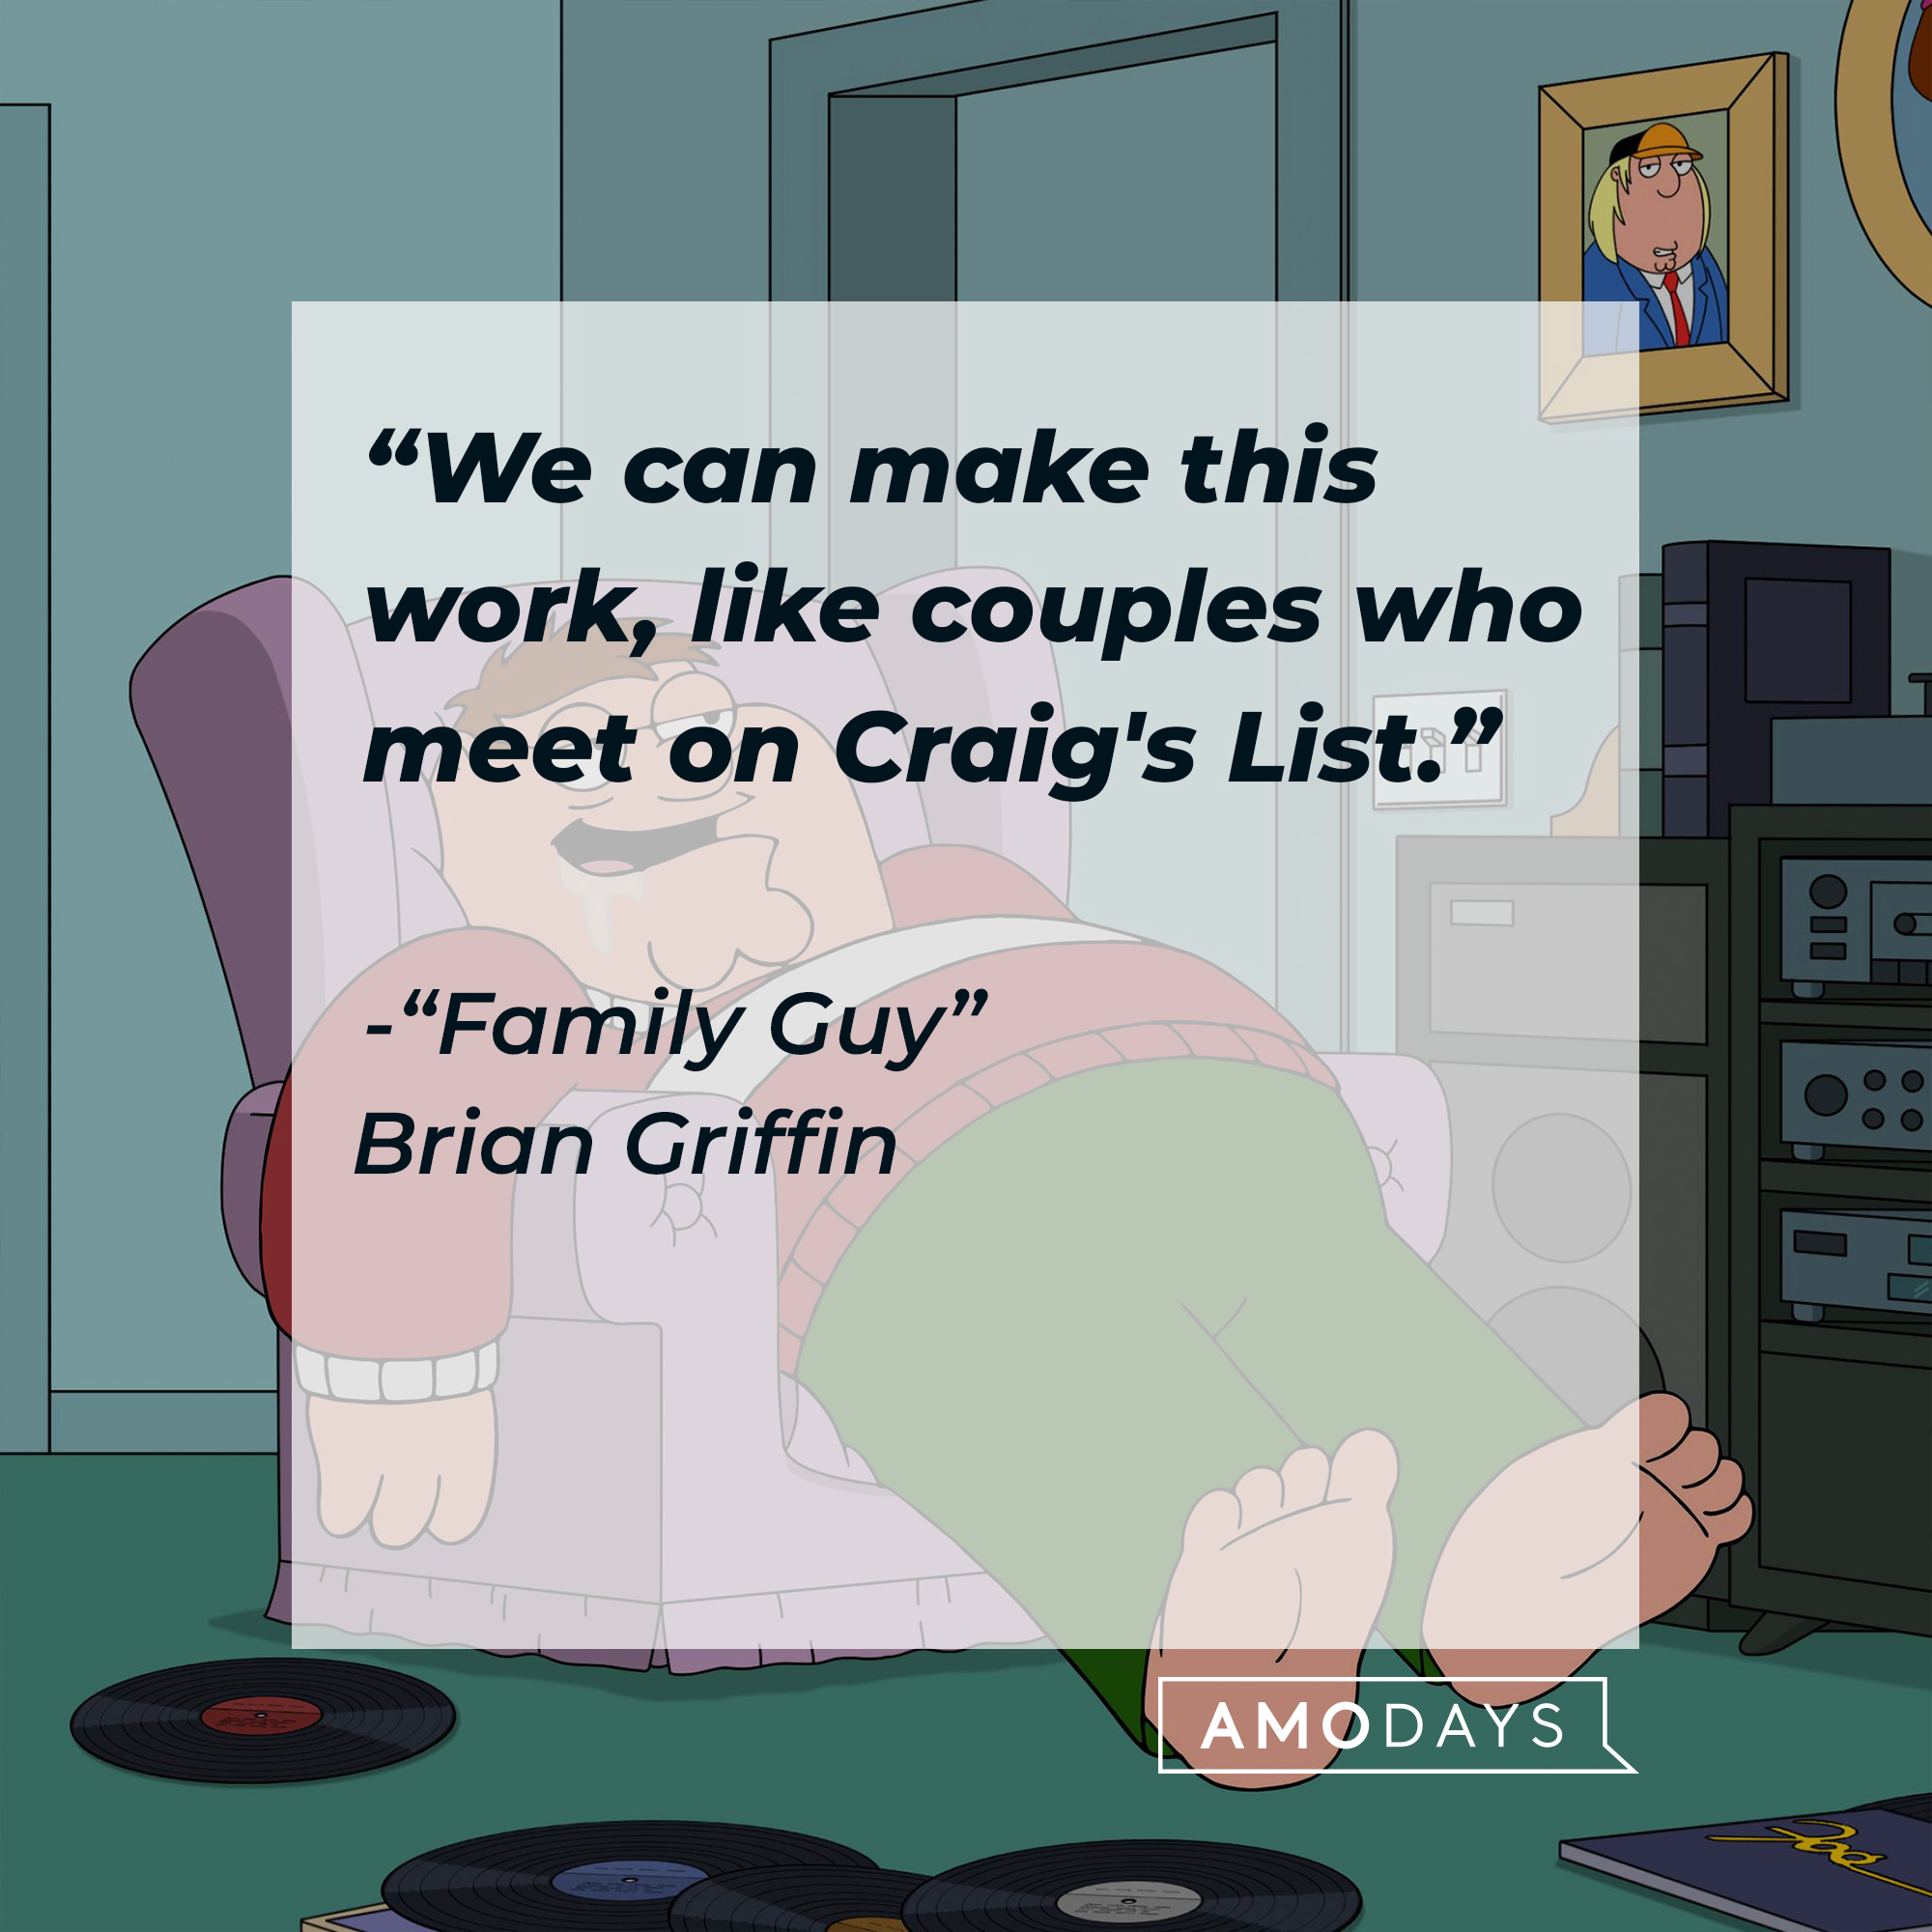 Peter Griffin with Brian Griffin's quote: “We can make this work, like couples who meet on Craig's List." | Source: Facebook.com/FamilyGuy